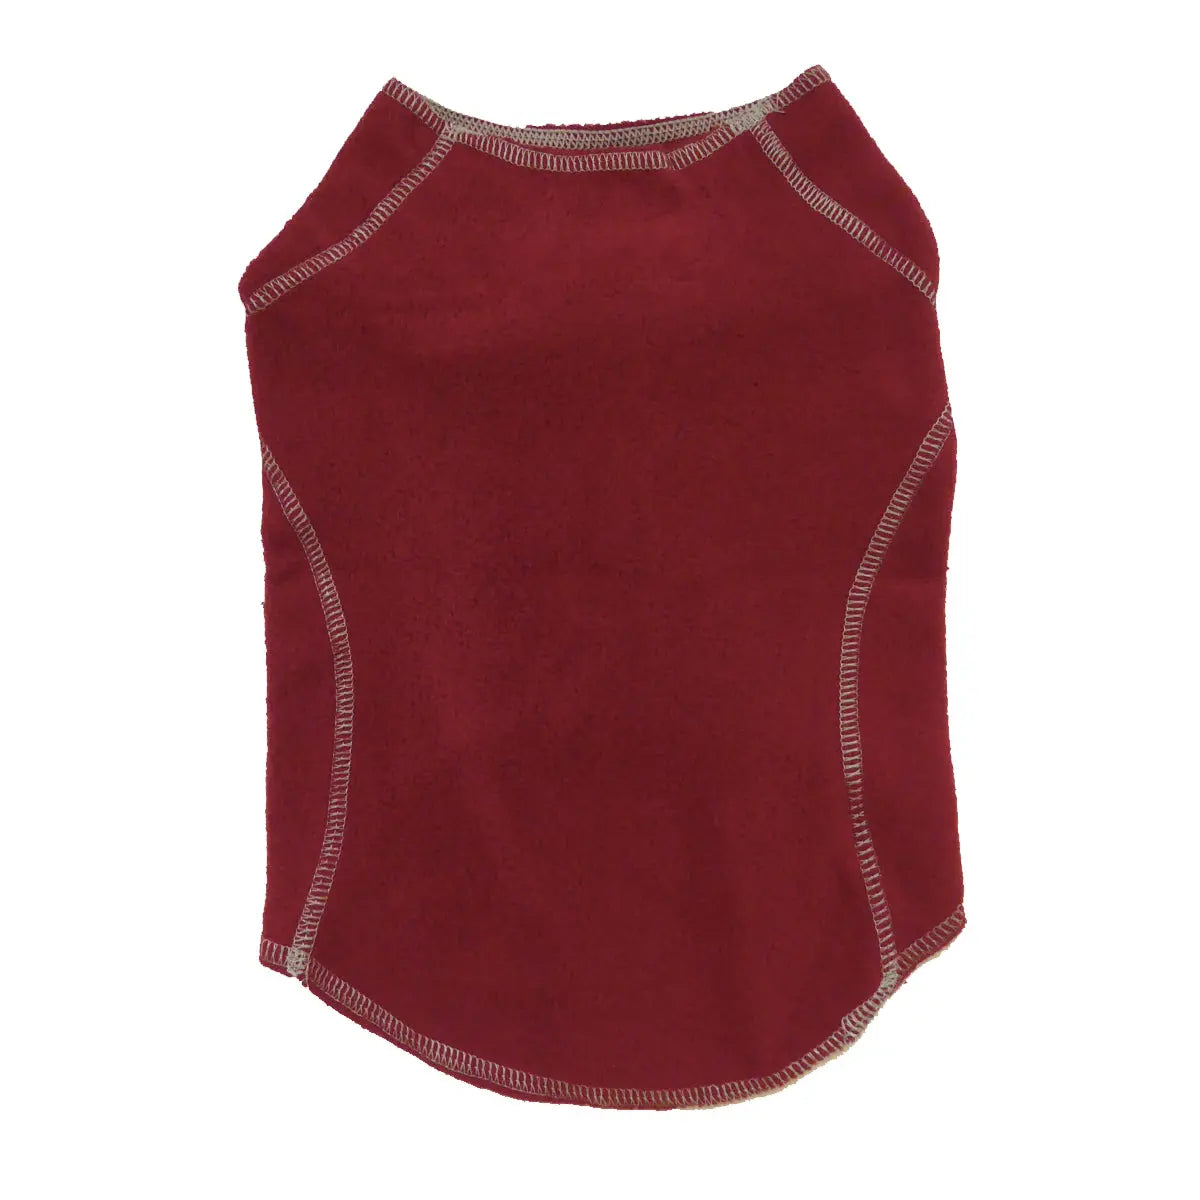 6500 Warm Fleece Sweater for All Dogs. Cool and Cold Weather. Burgundy